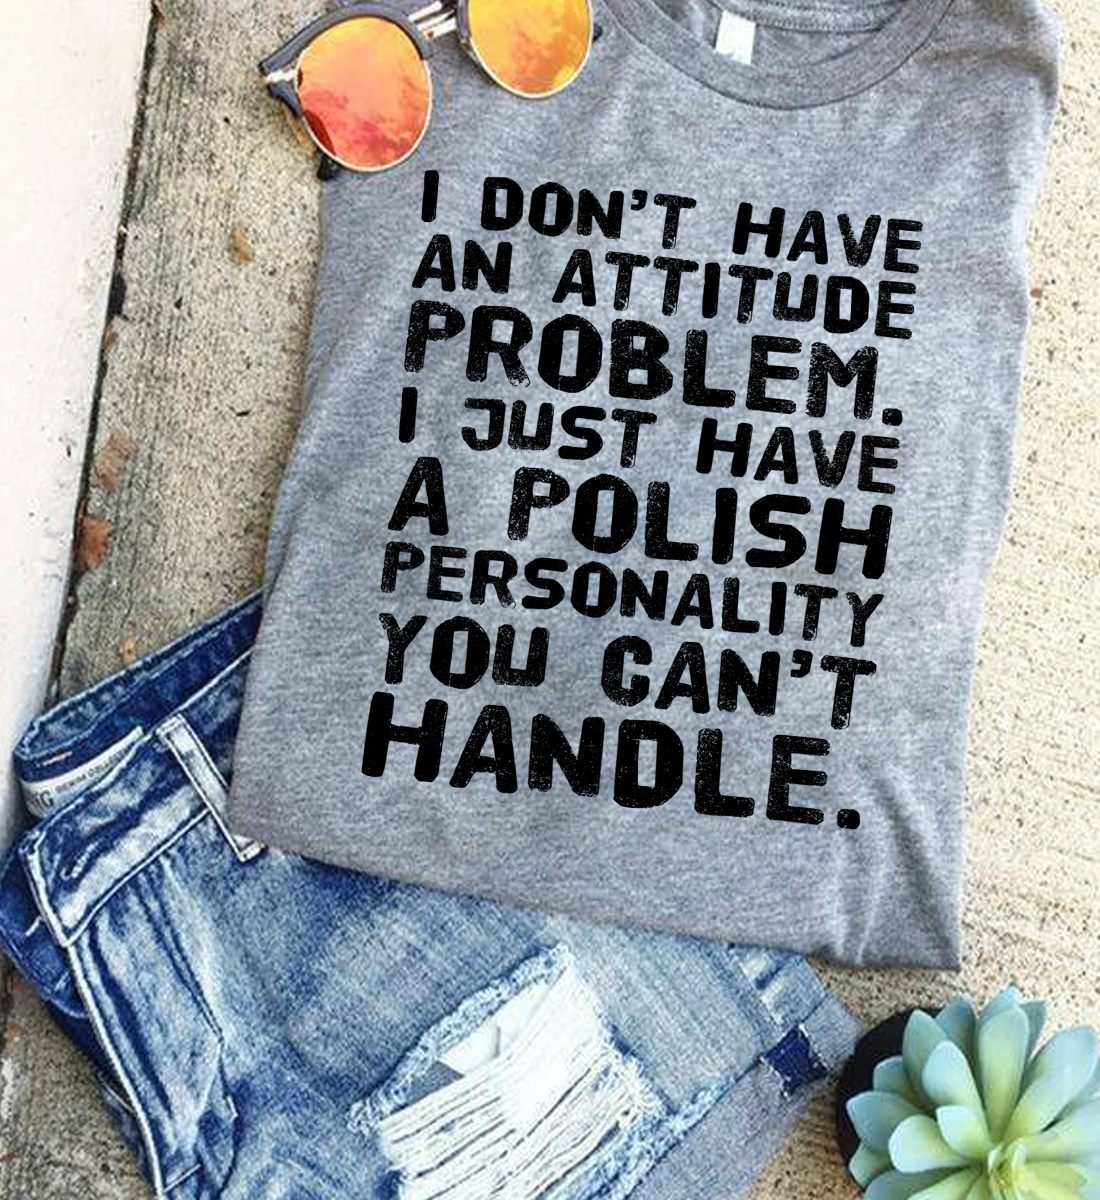 I don't have attitude problem. I just have a polish personality you can't handle